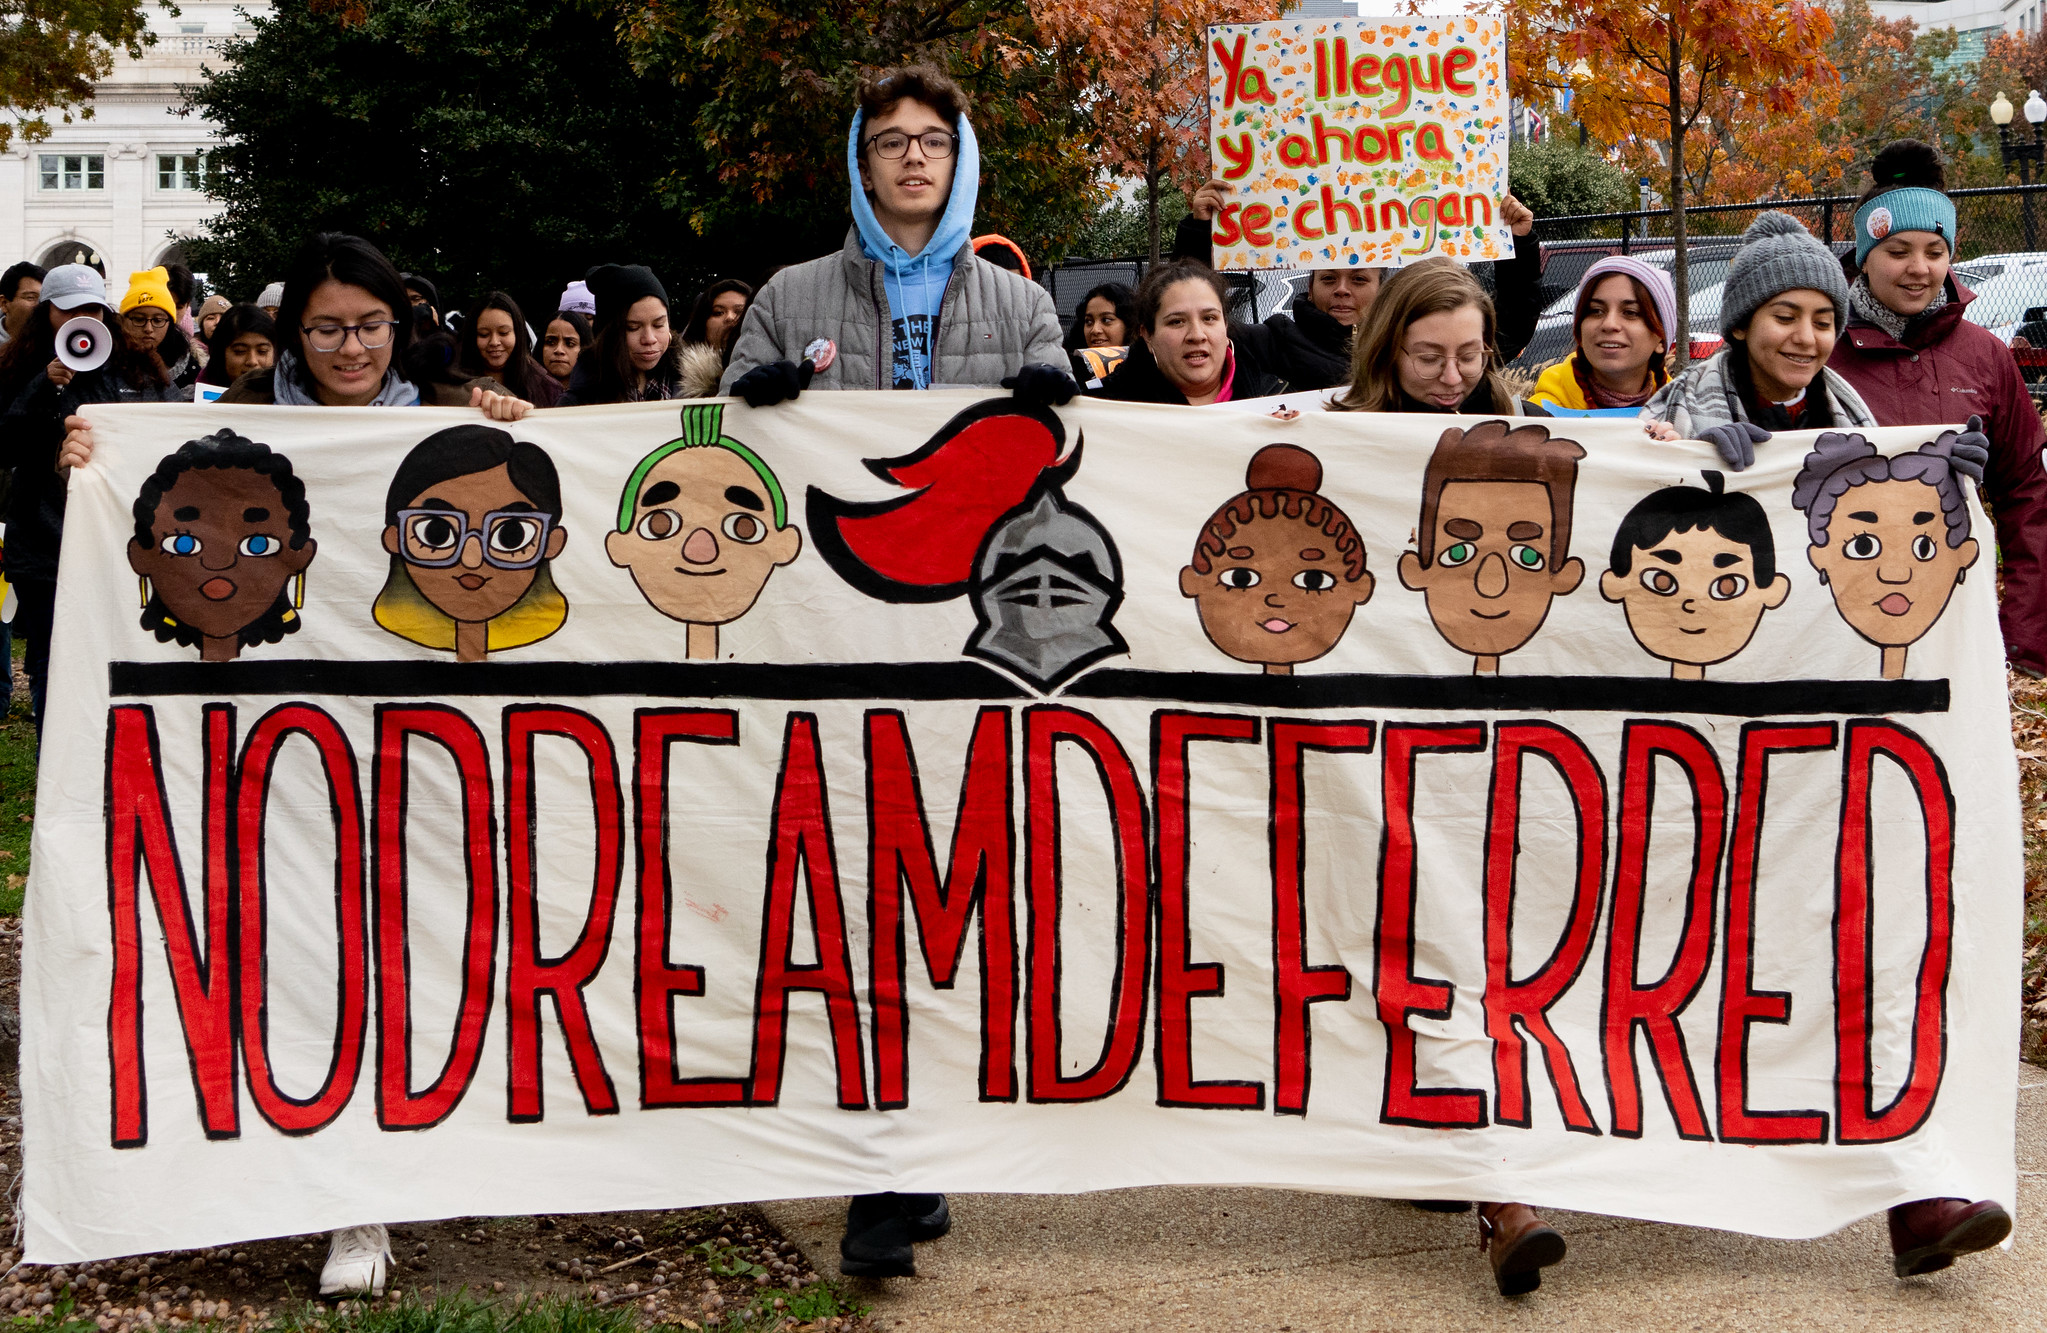 DACA program limited by Donald Trump #39 s attempts to end it